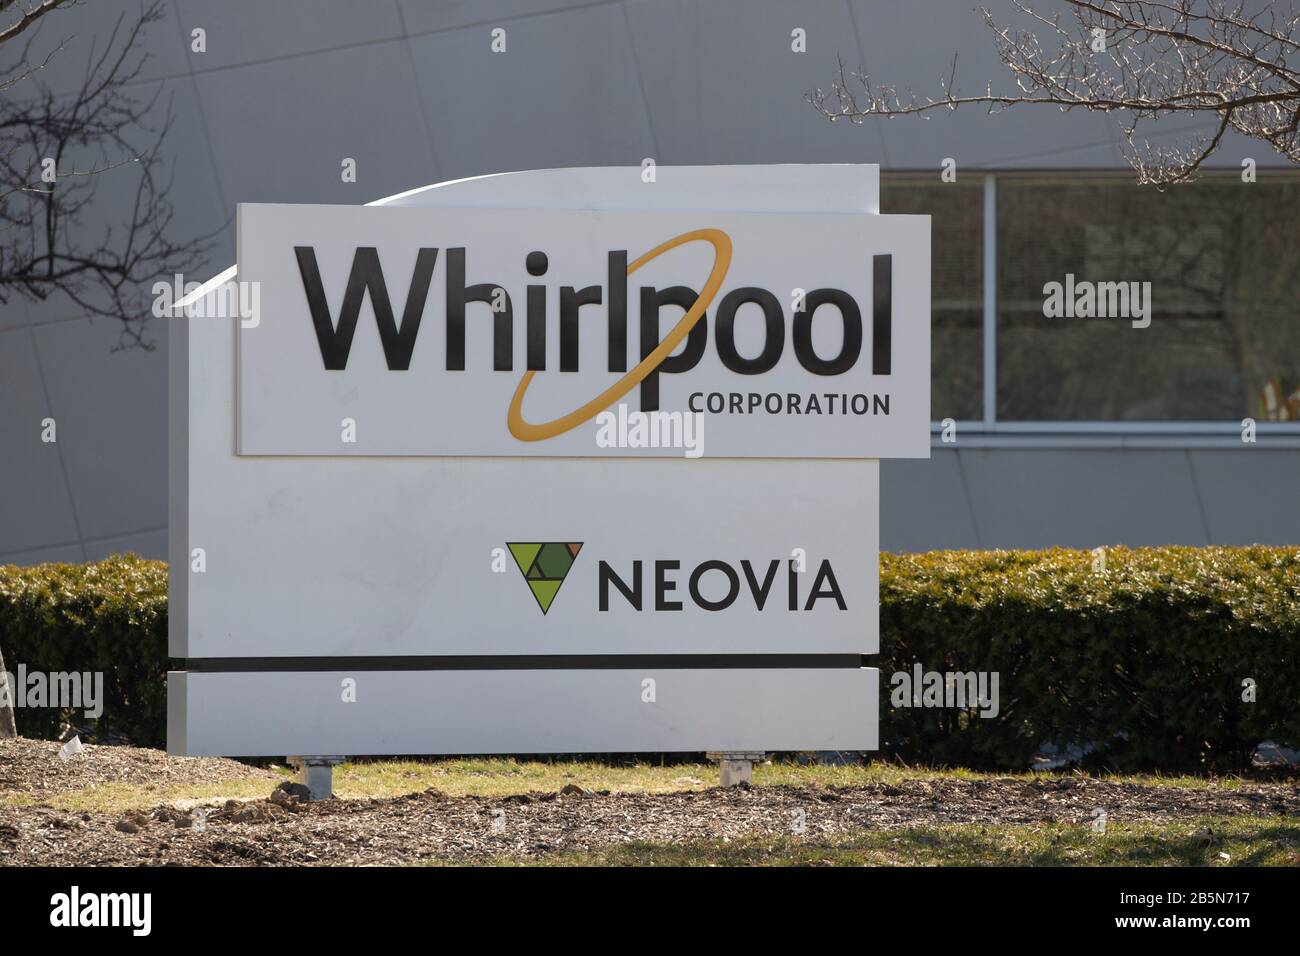 Plainfield - Circa March 2020: Whirlpool Distribution Center. Whirlpool manufactures home appliances under the KitchenAid, Maytag, Consul, Brastemp, A Stock Photo